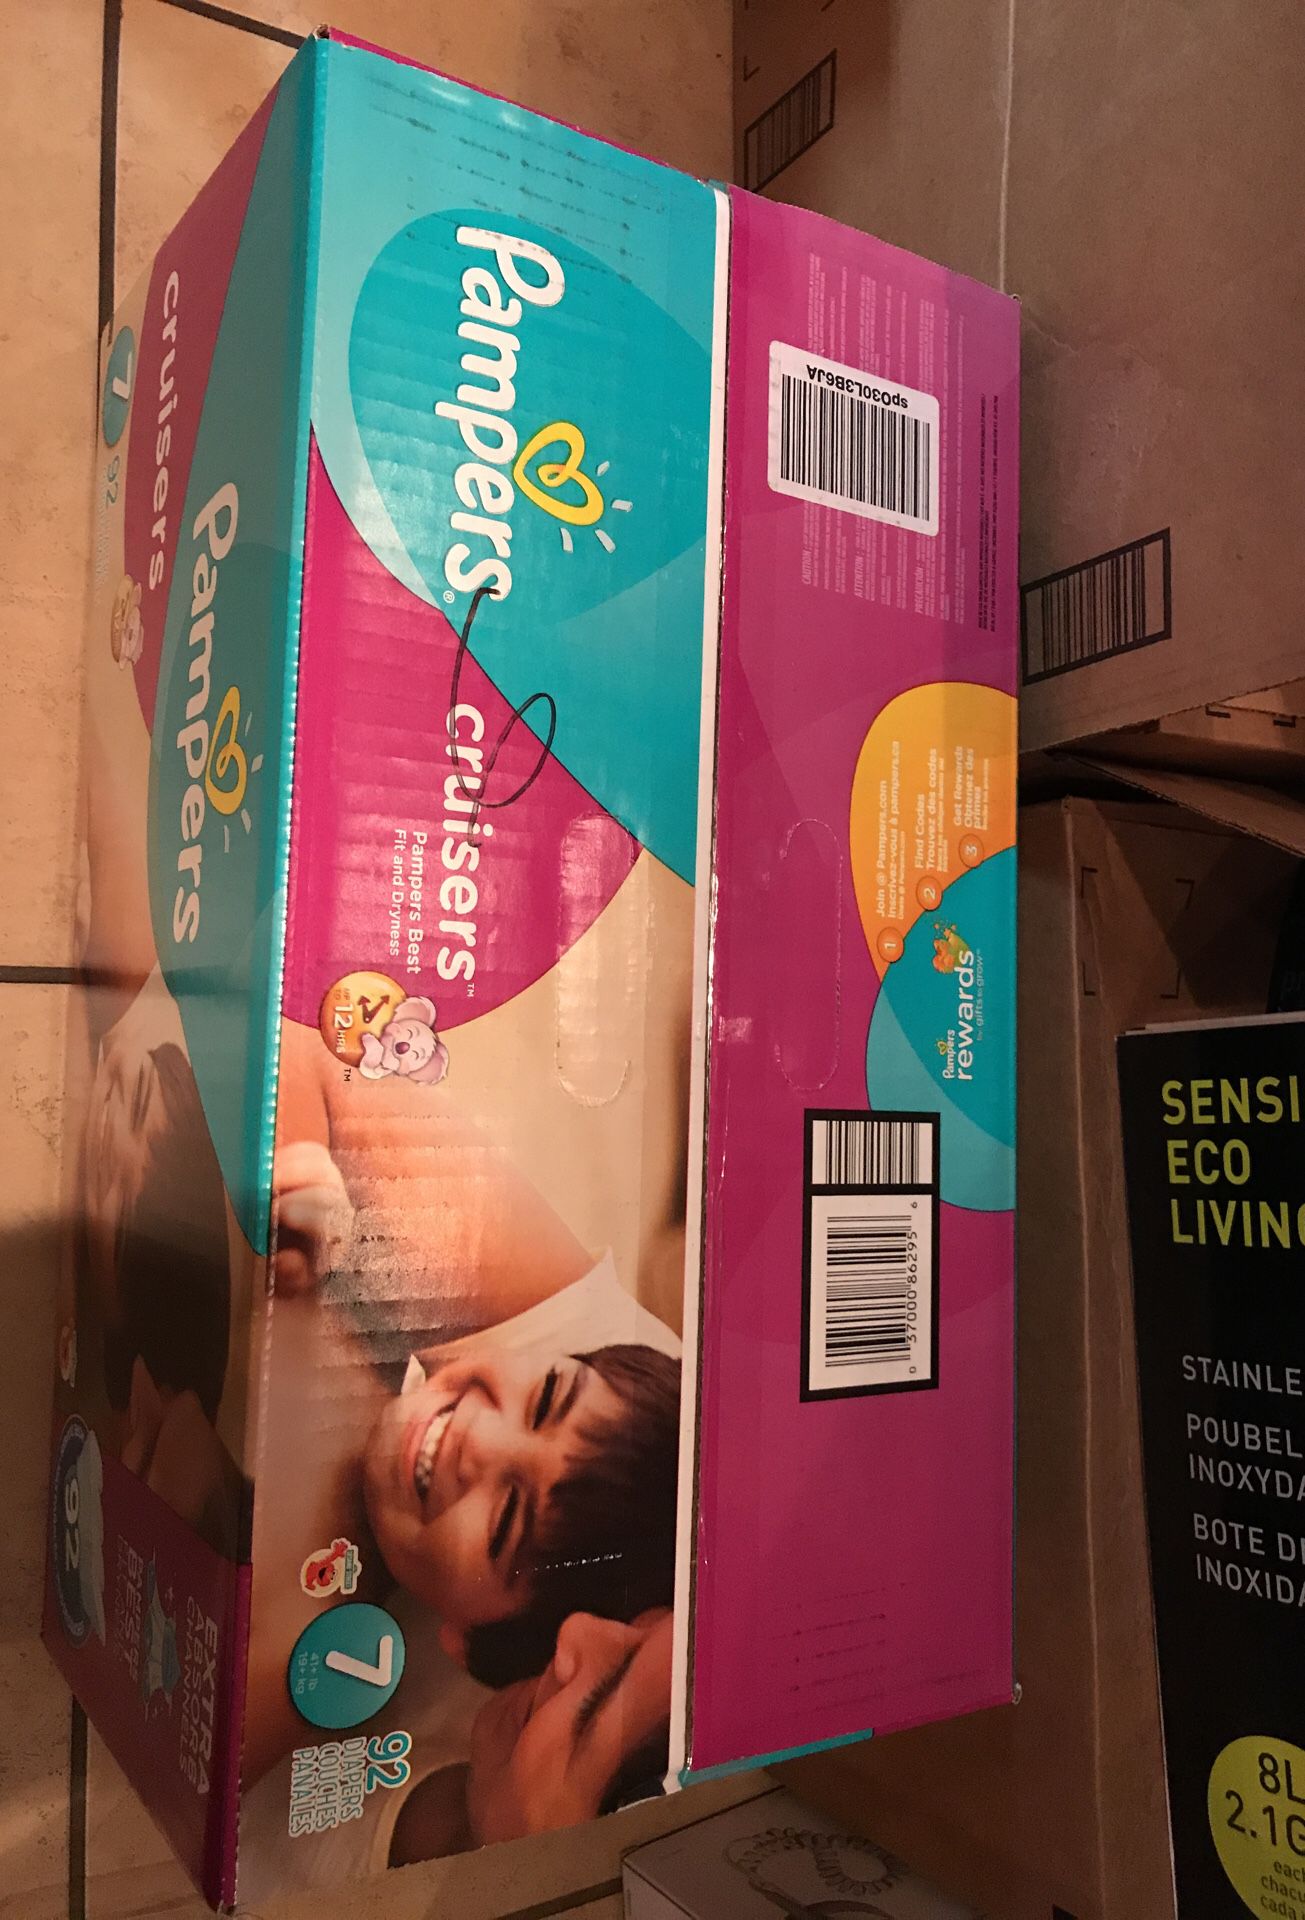 Diapers Parents choice size 7 for Sale in Hayward, CA - OfferUp